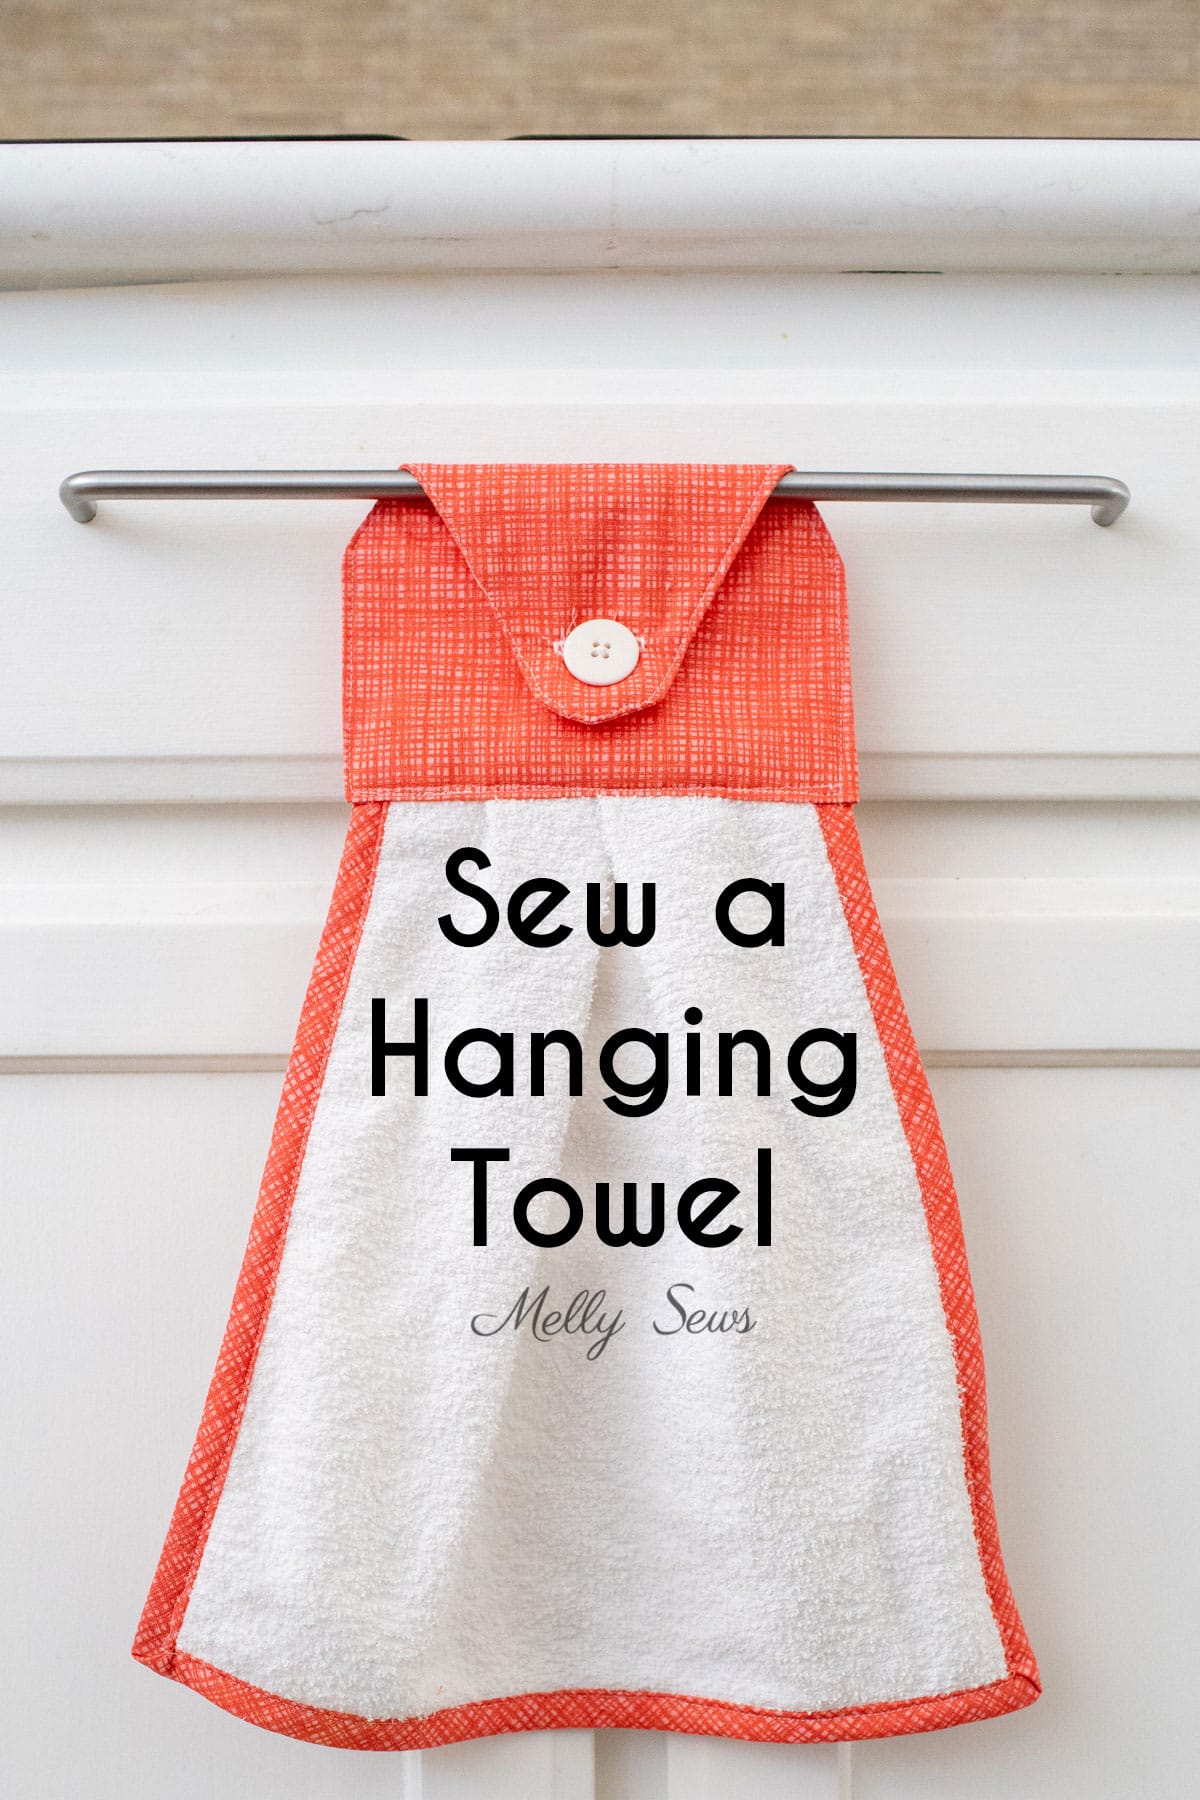 Hanging Button-on Kitchen Towel